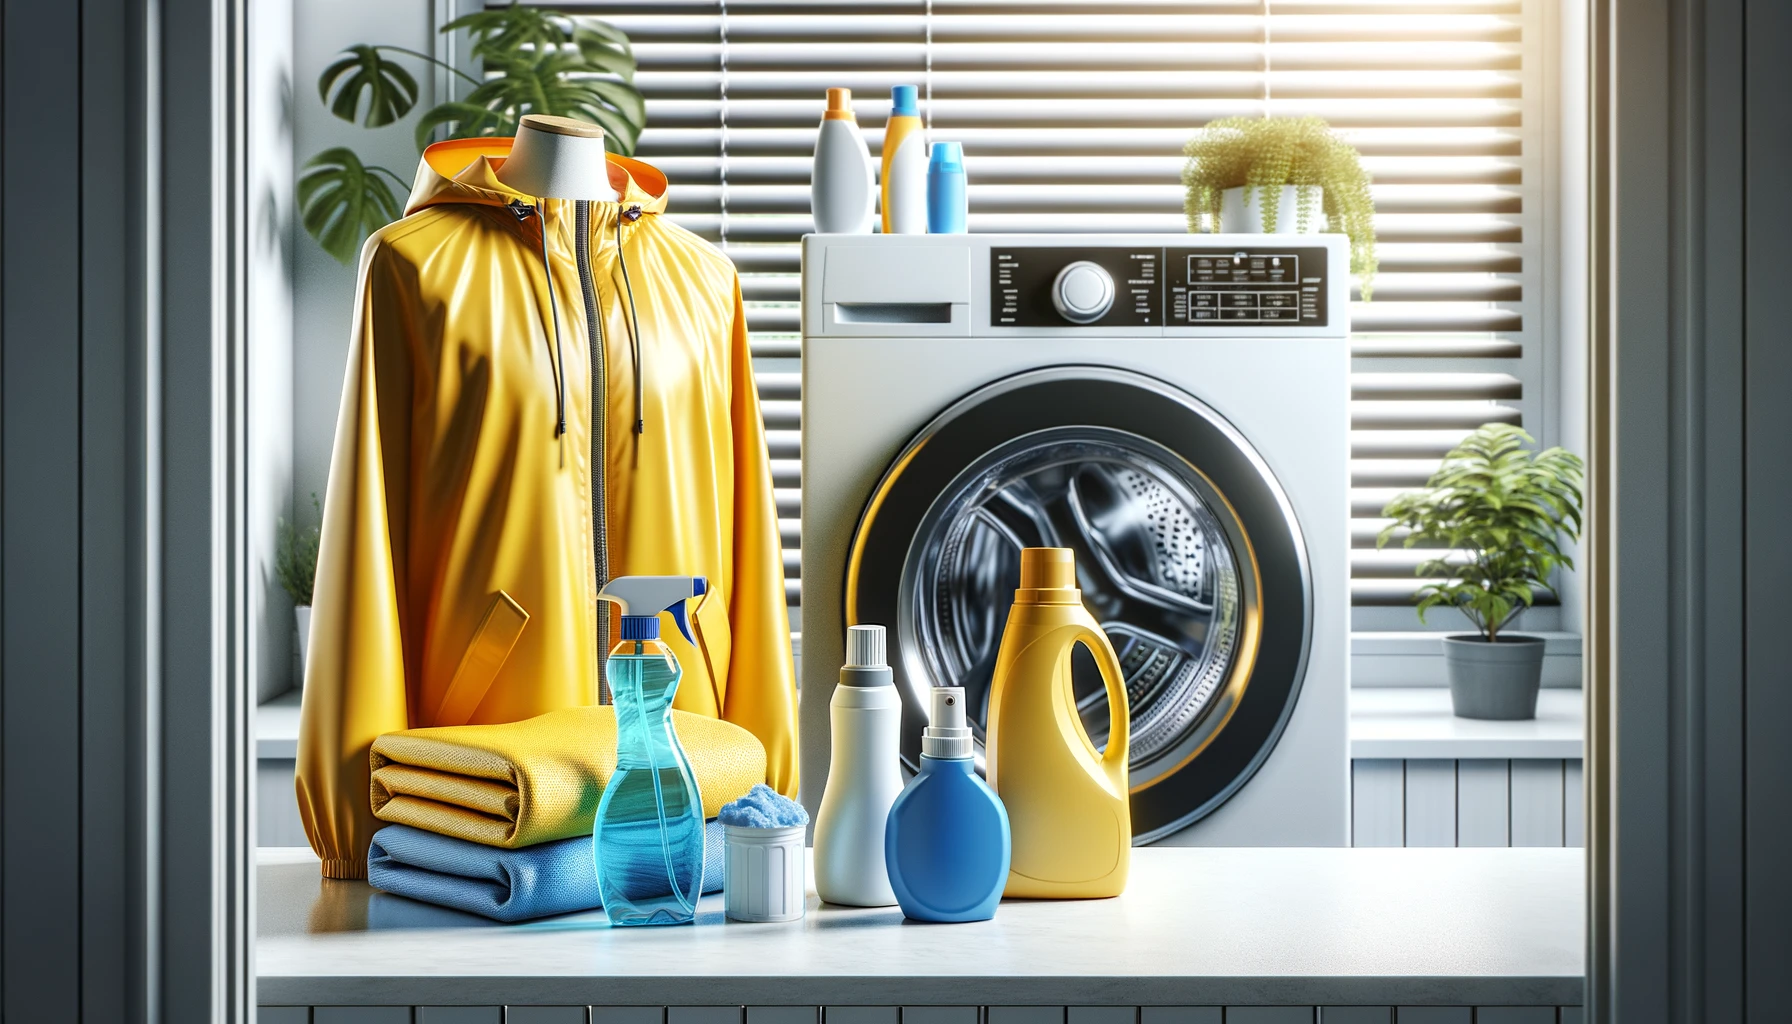 A yellow rain jacket on a countertop with laundry supplies and a washing machine near a window with blinds.